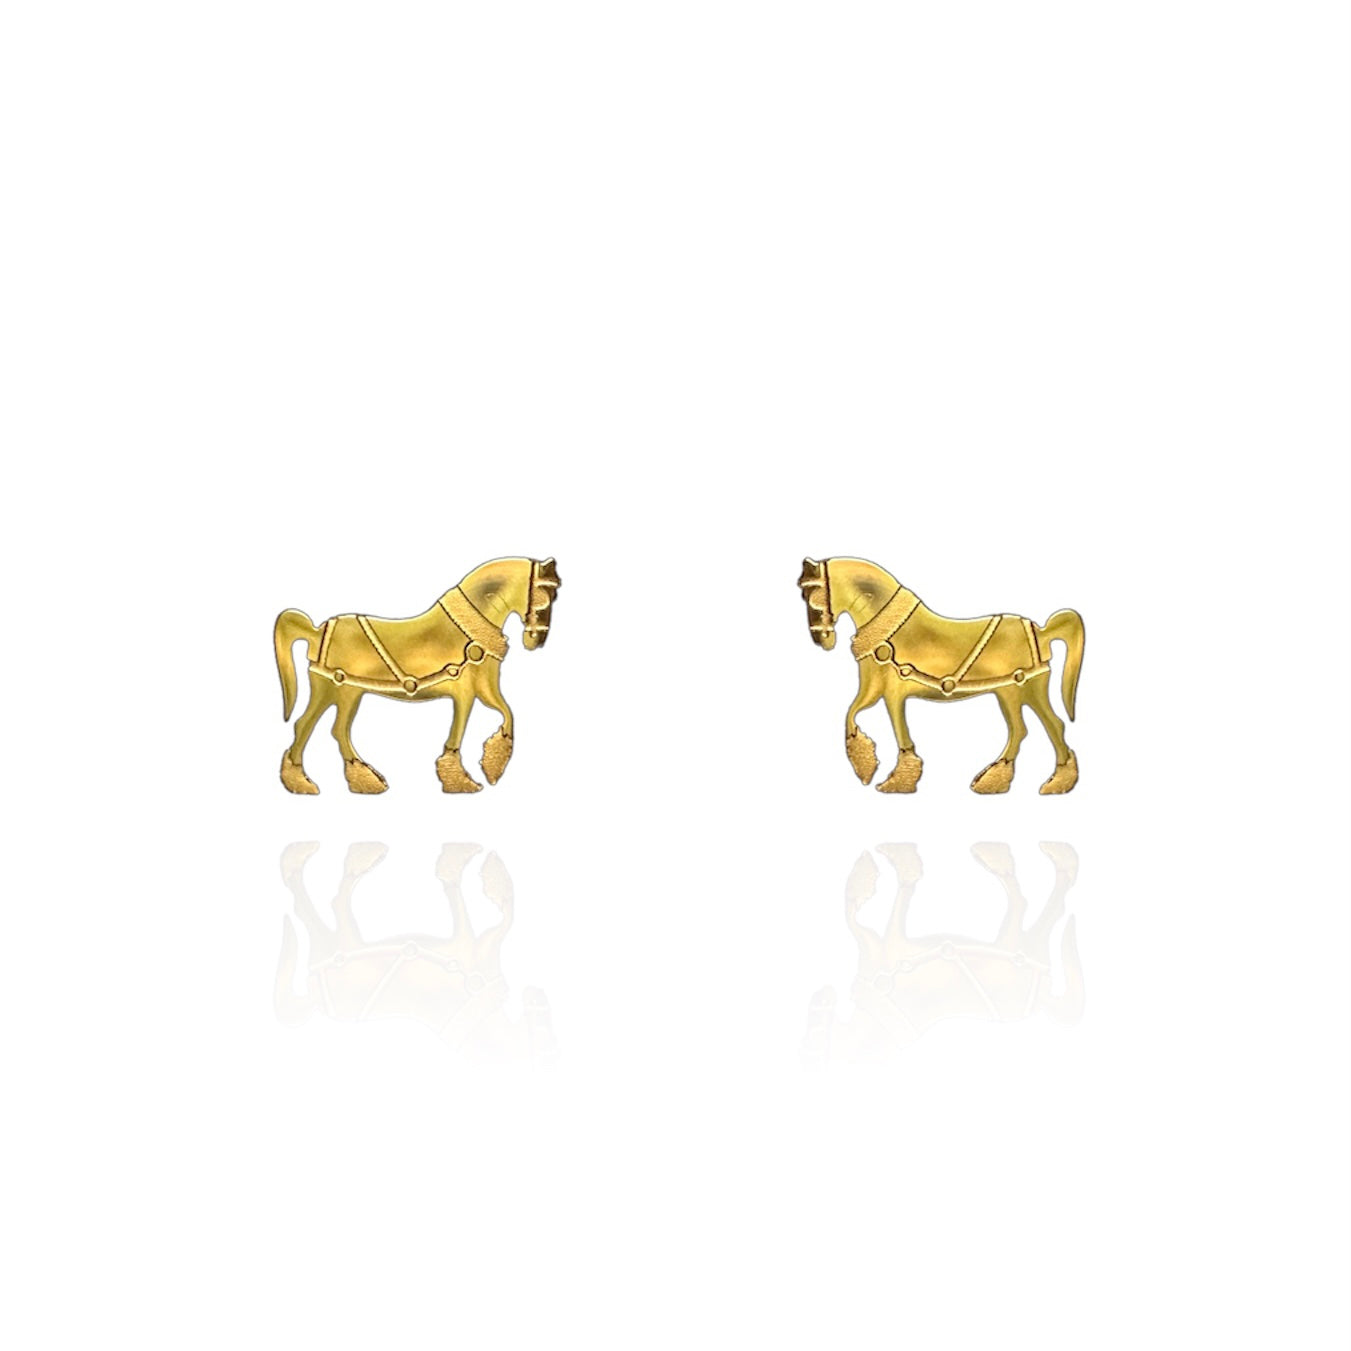 Clydesdale Horse Earring Studs Gold